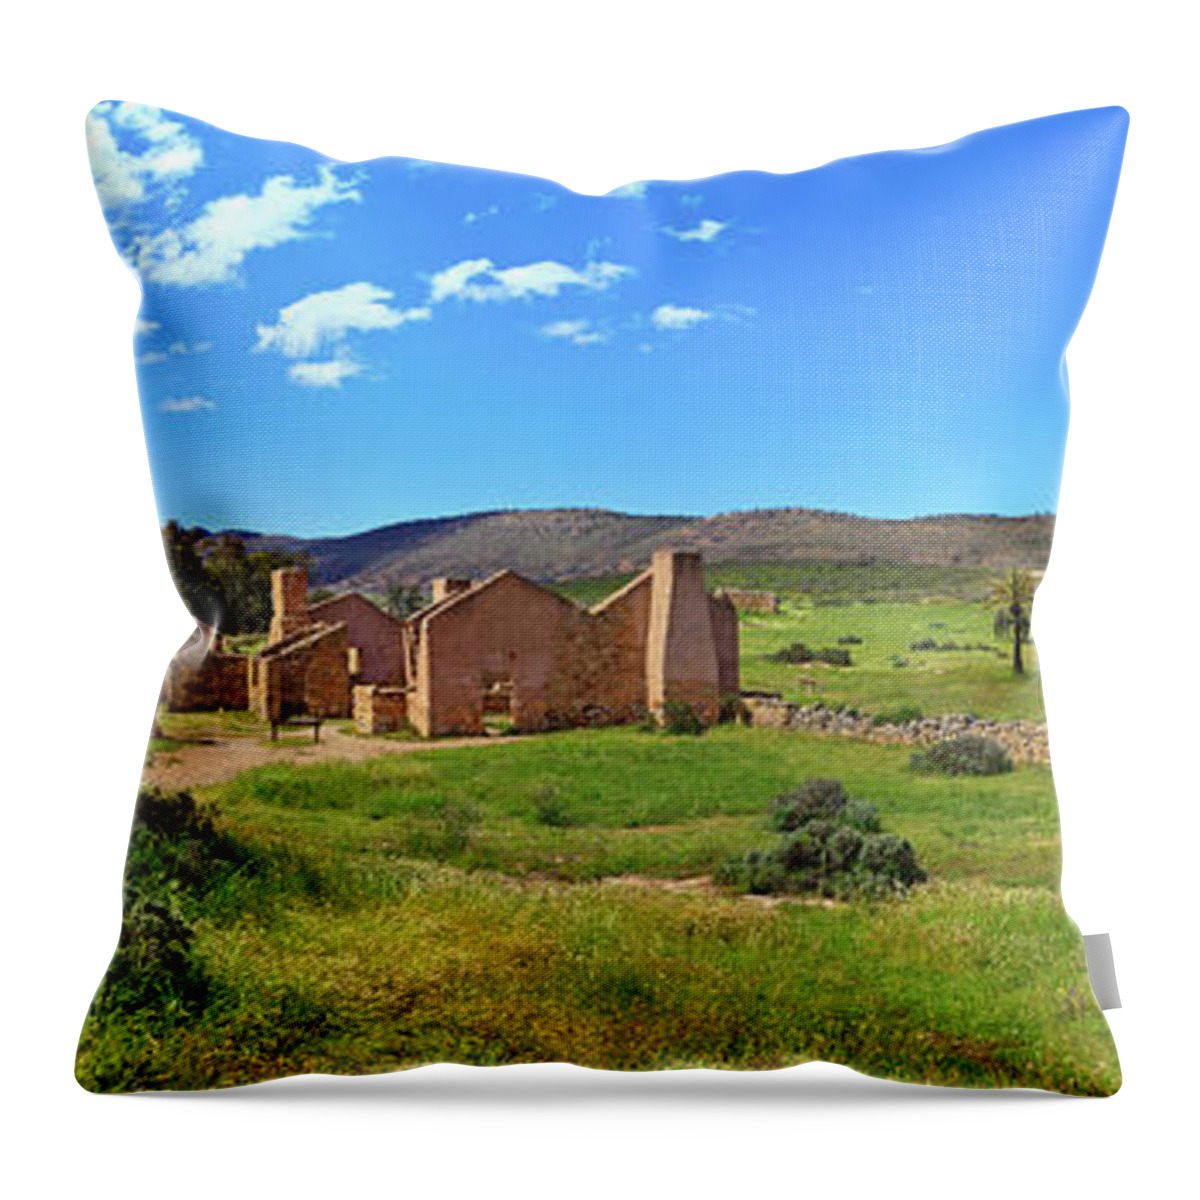 Kanyaka Homestead Ruins Outback Landscape Flinders Ranges South Australia Australian Landscapes Historical Throw Pillow featuring the photograph Kanyaka Homestead Ruins by Bill Robinson